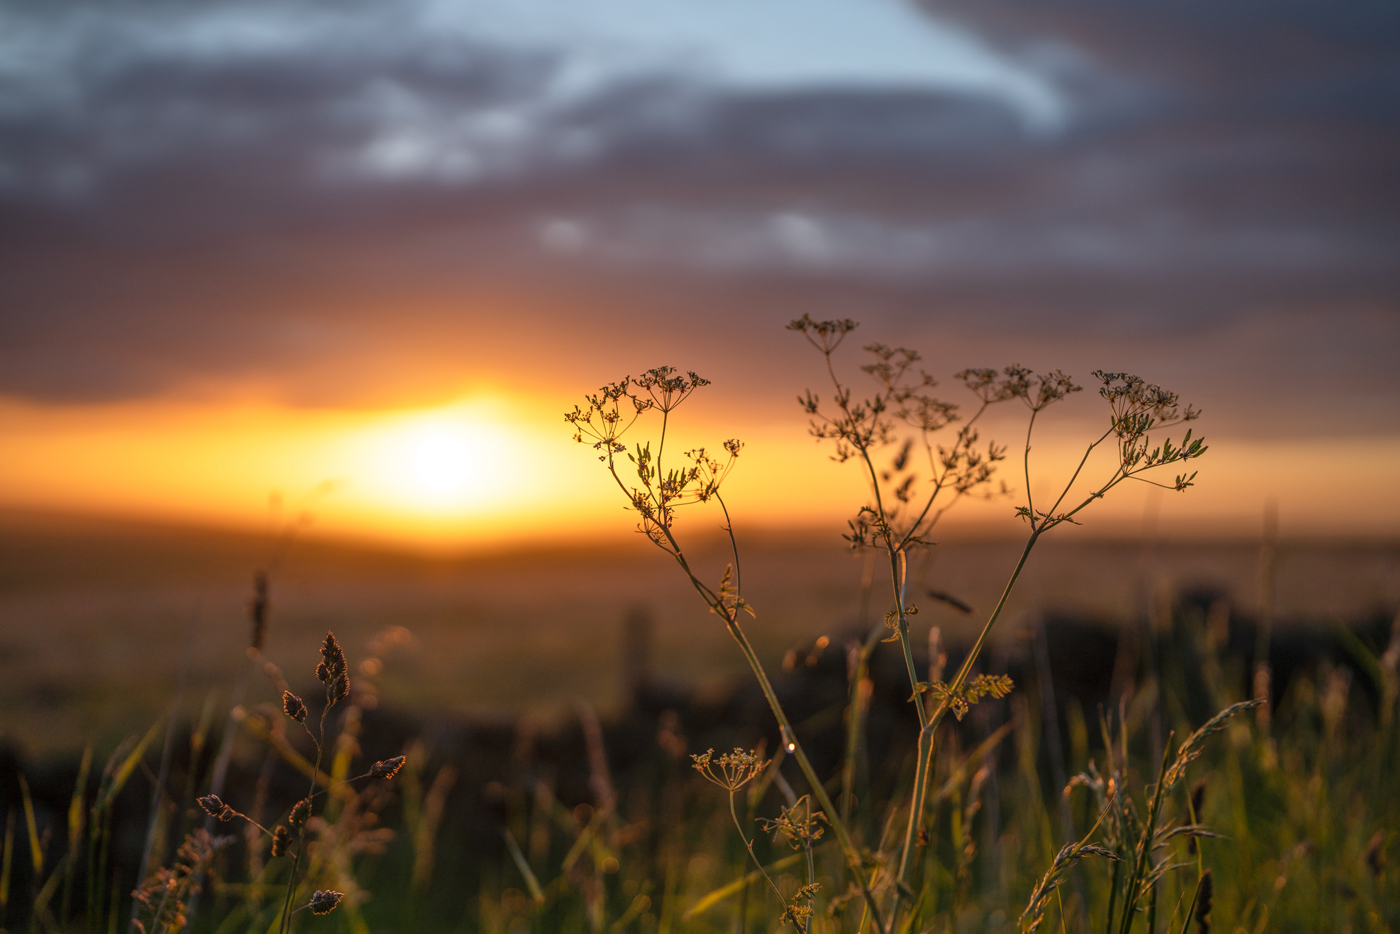 In North Yorkshire, wildflowers silhouette against a warm sunrise with hues of orange and yellow, gently diffusing light across the sky and a pastoral landscape. The grass glimmers as if touched by the rising sun. a sunset over a grass field